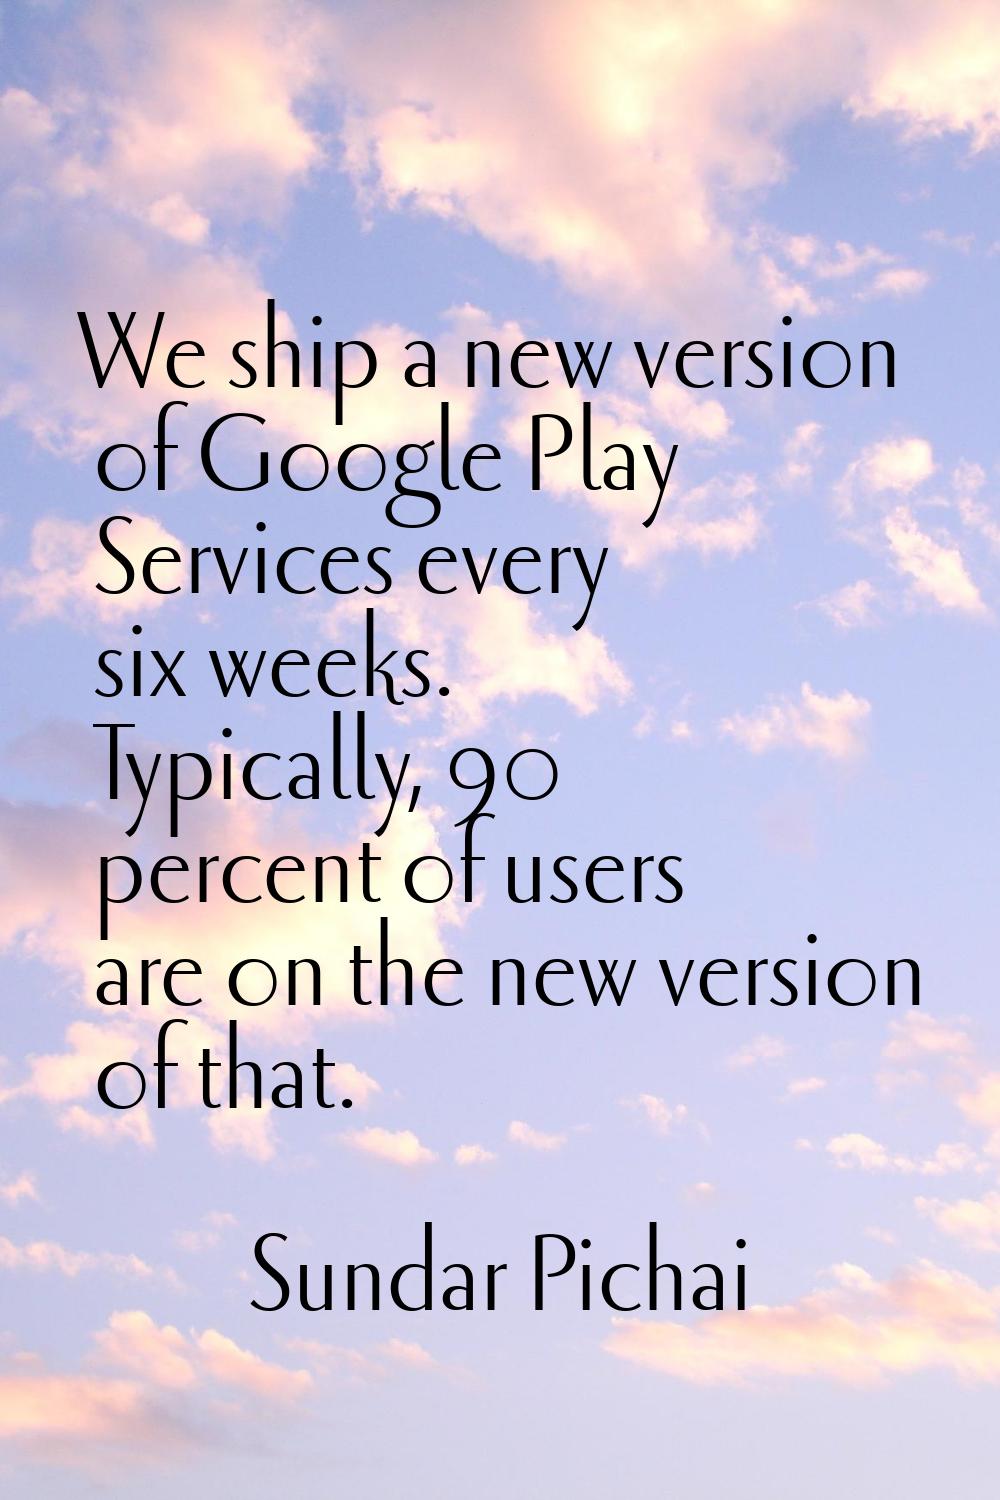 We ship a new version of Google Play Services every six weeks. Typically, 90 percent of users are o